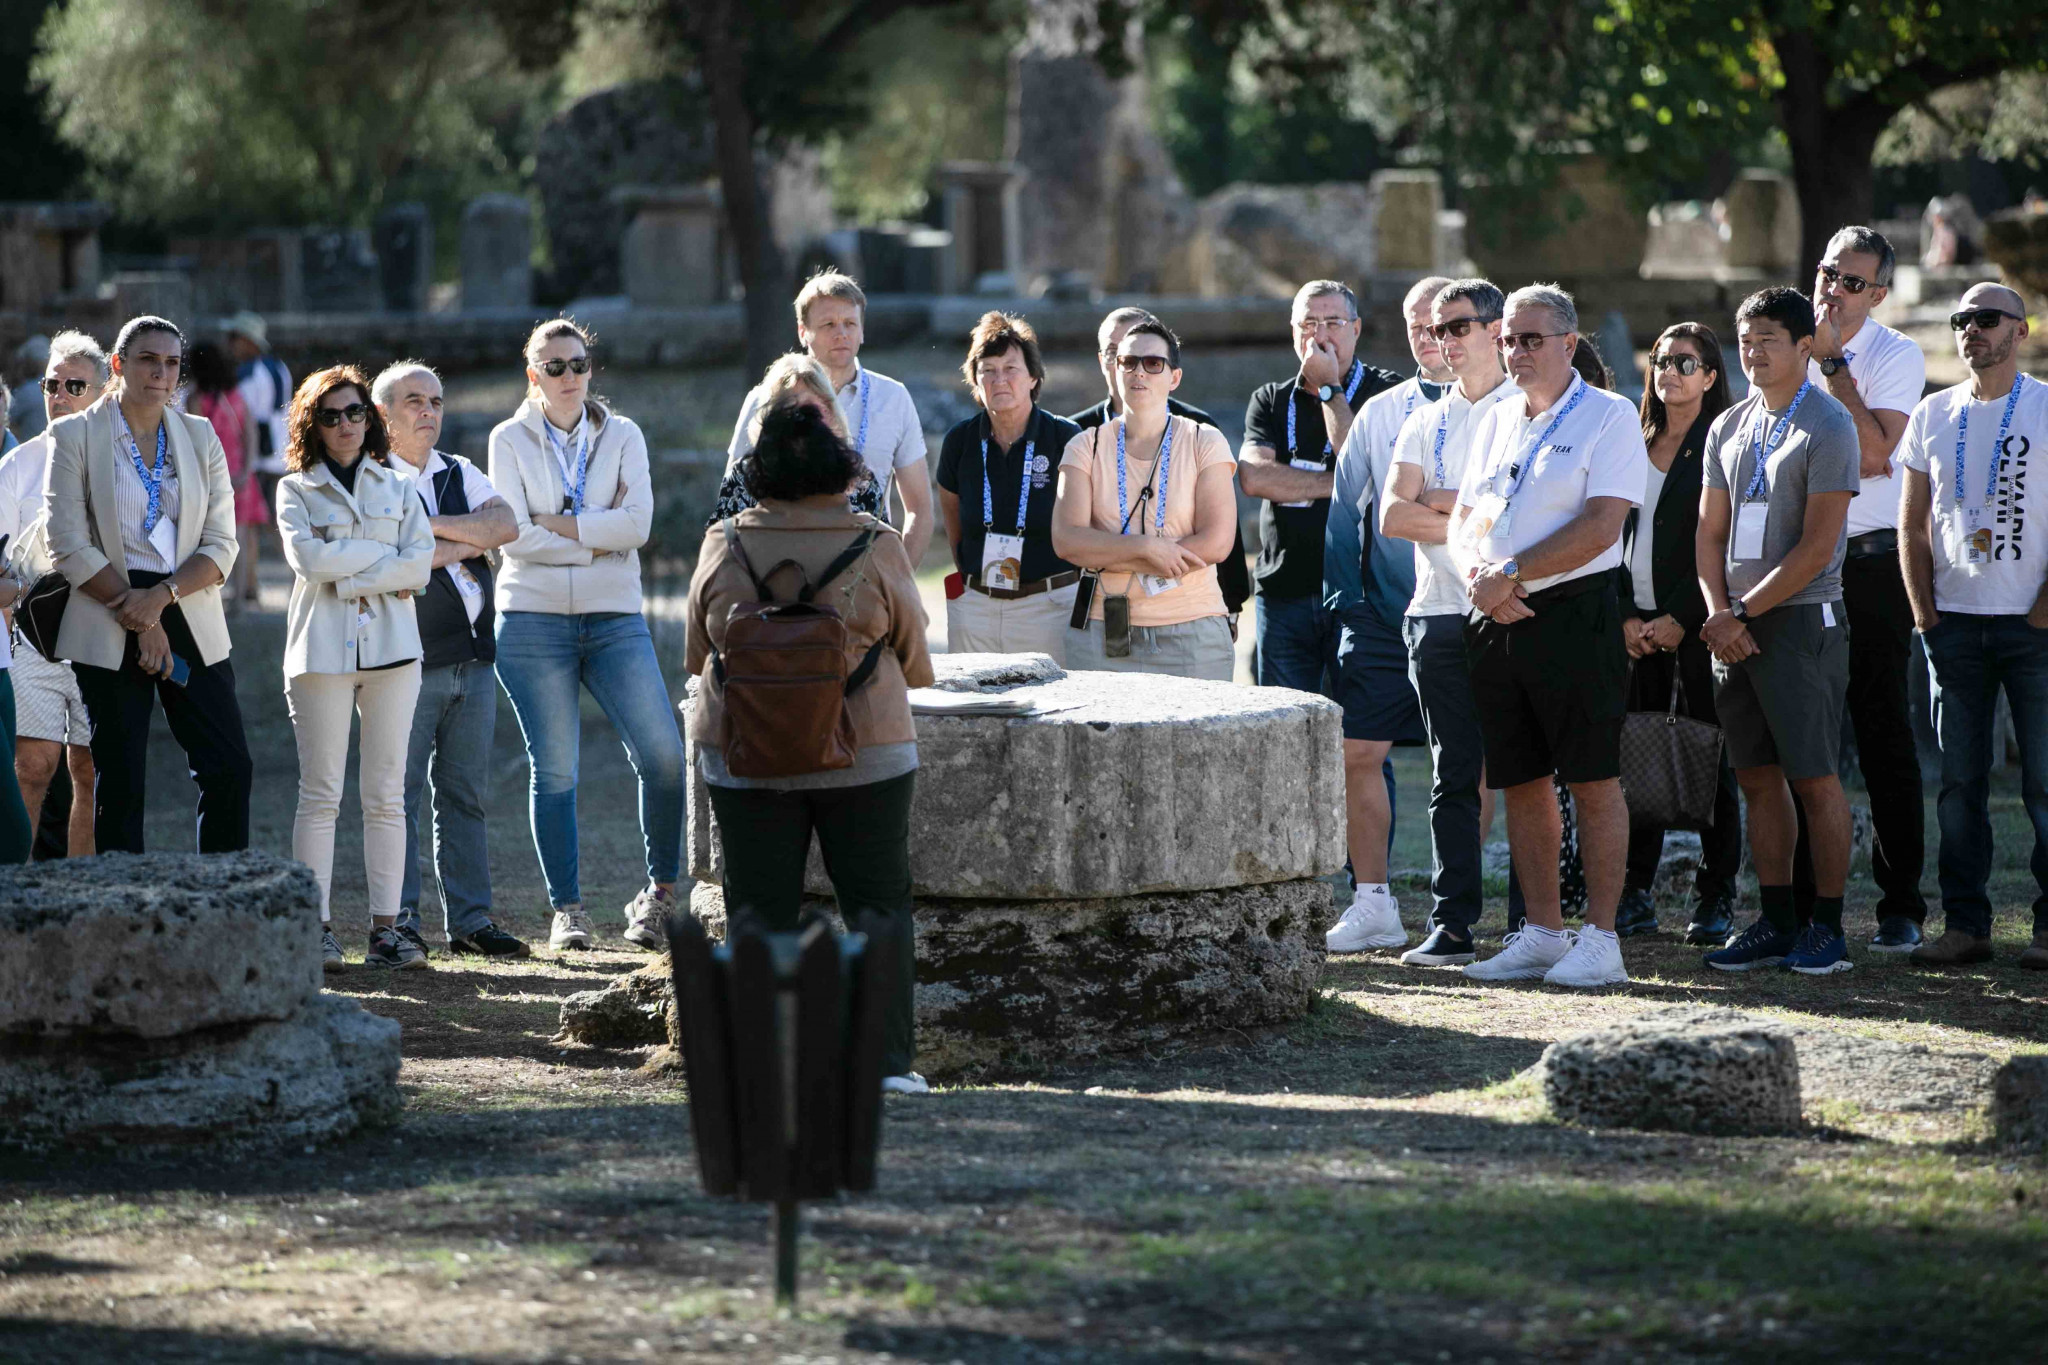 EOC members gather around the main tour guide as they were informed about the site's history and significance ©EOC